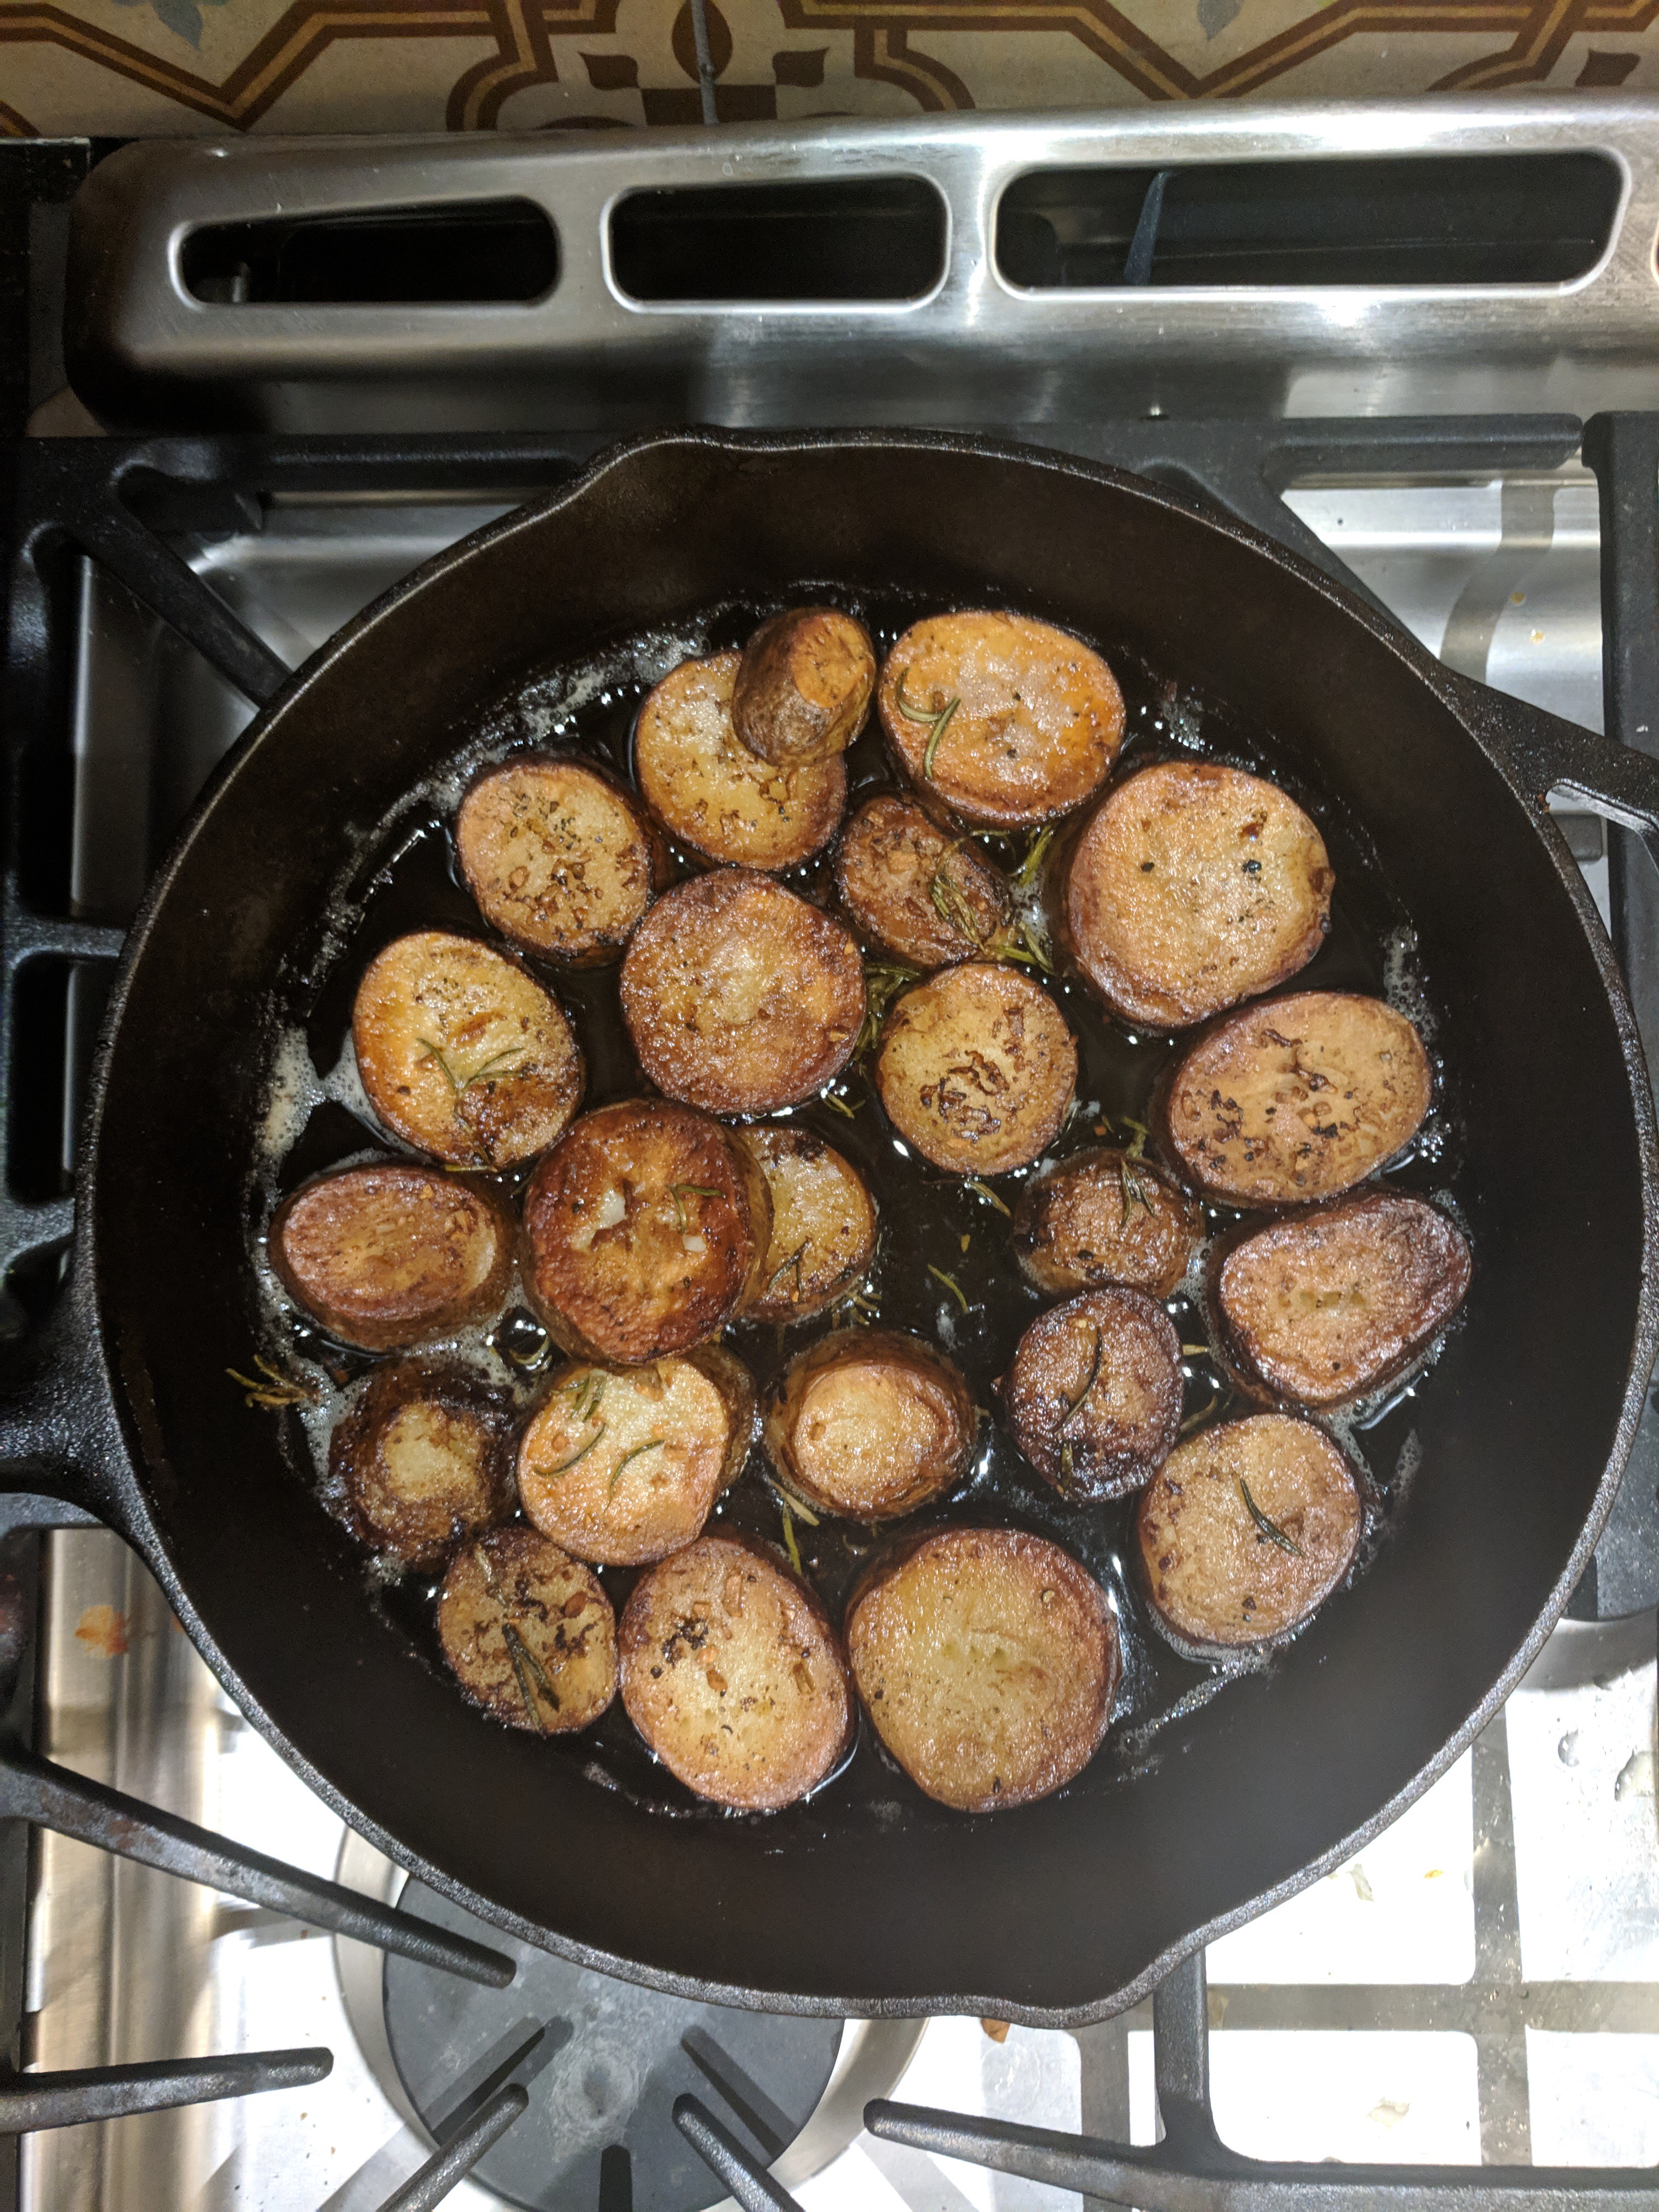 Photo of melting potatoes from above.